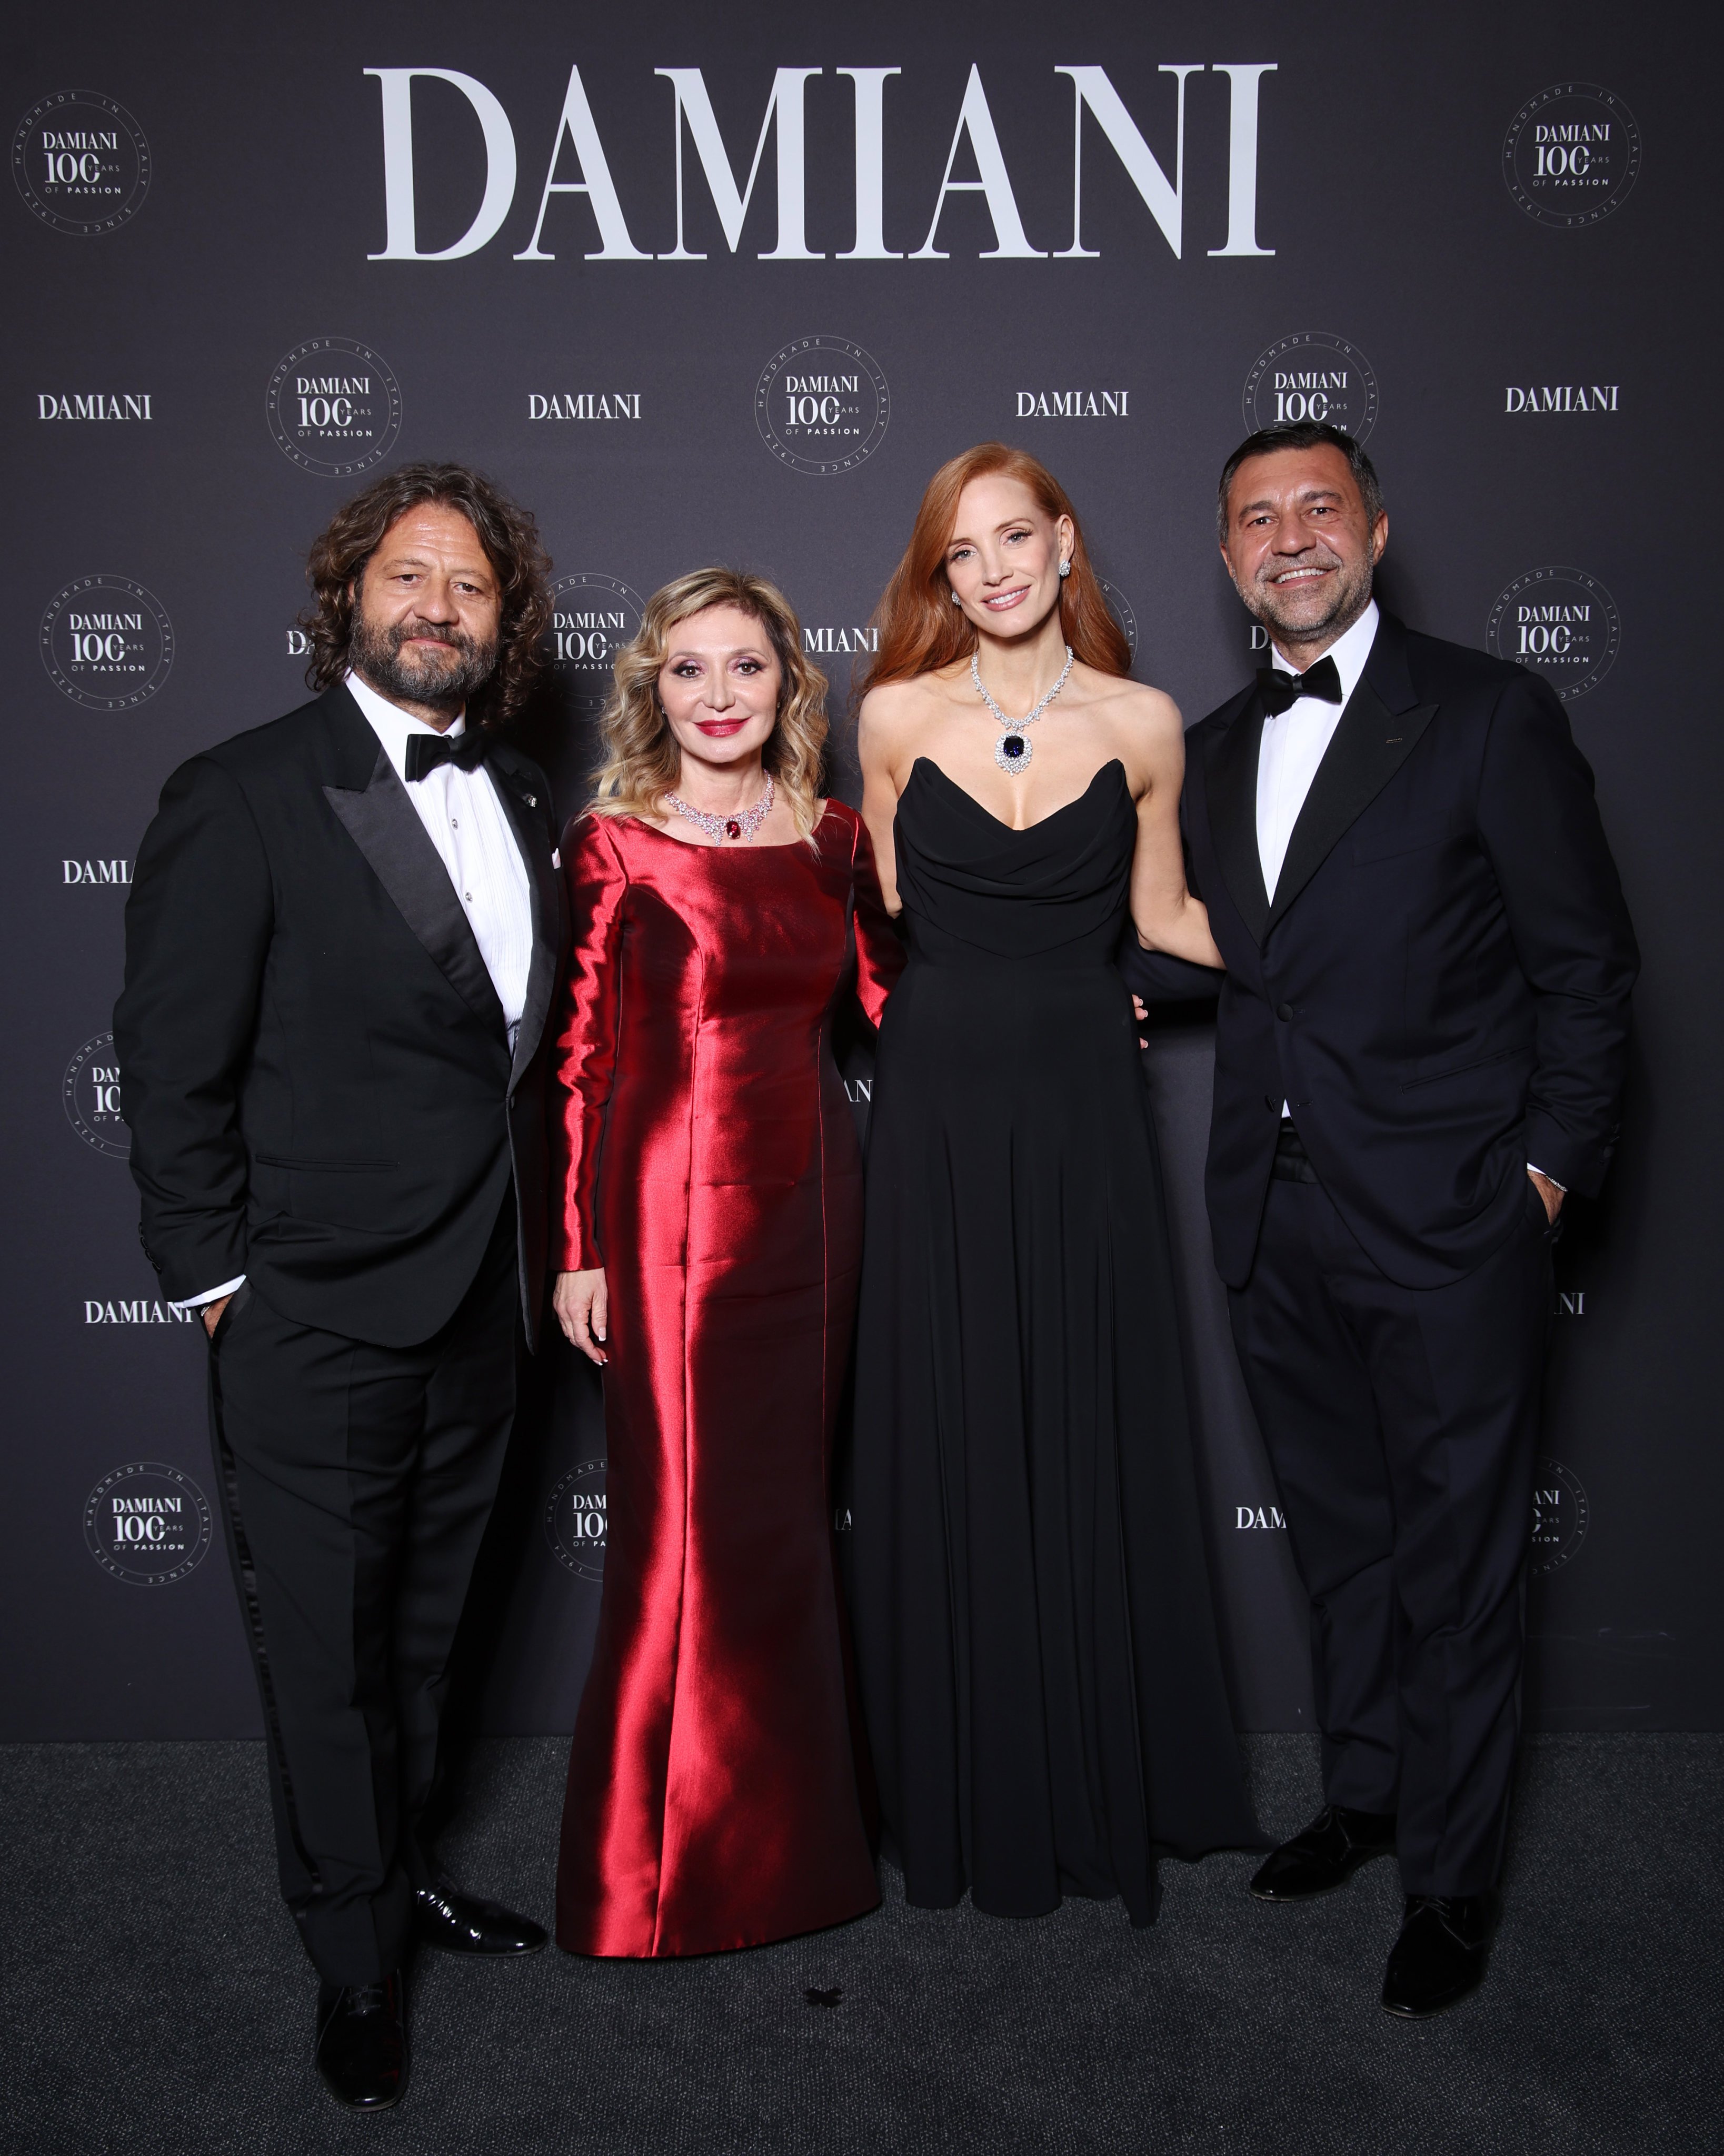 Members of the Damiani family with Jessica Chastain at the Damiani Centenary gala dinner on March 14, with the high jewellery brand also marking the anniversary with an exhibition of 100 masterpieces, including some gemstones of more than 100 carats. Photo: Getty Images